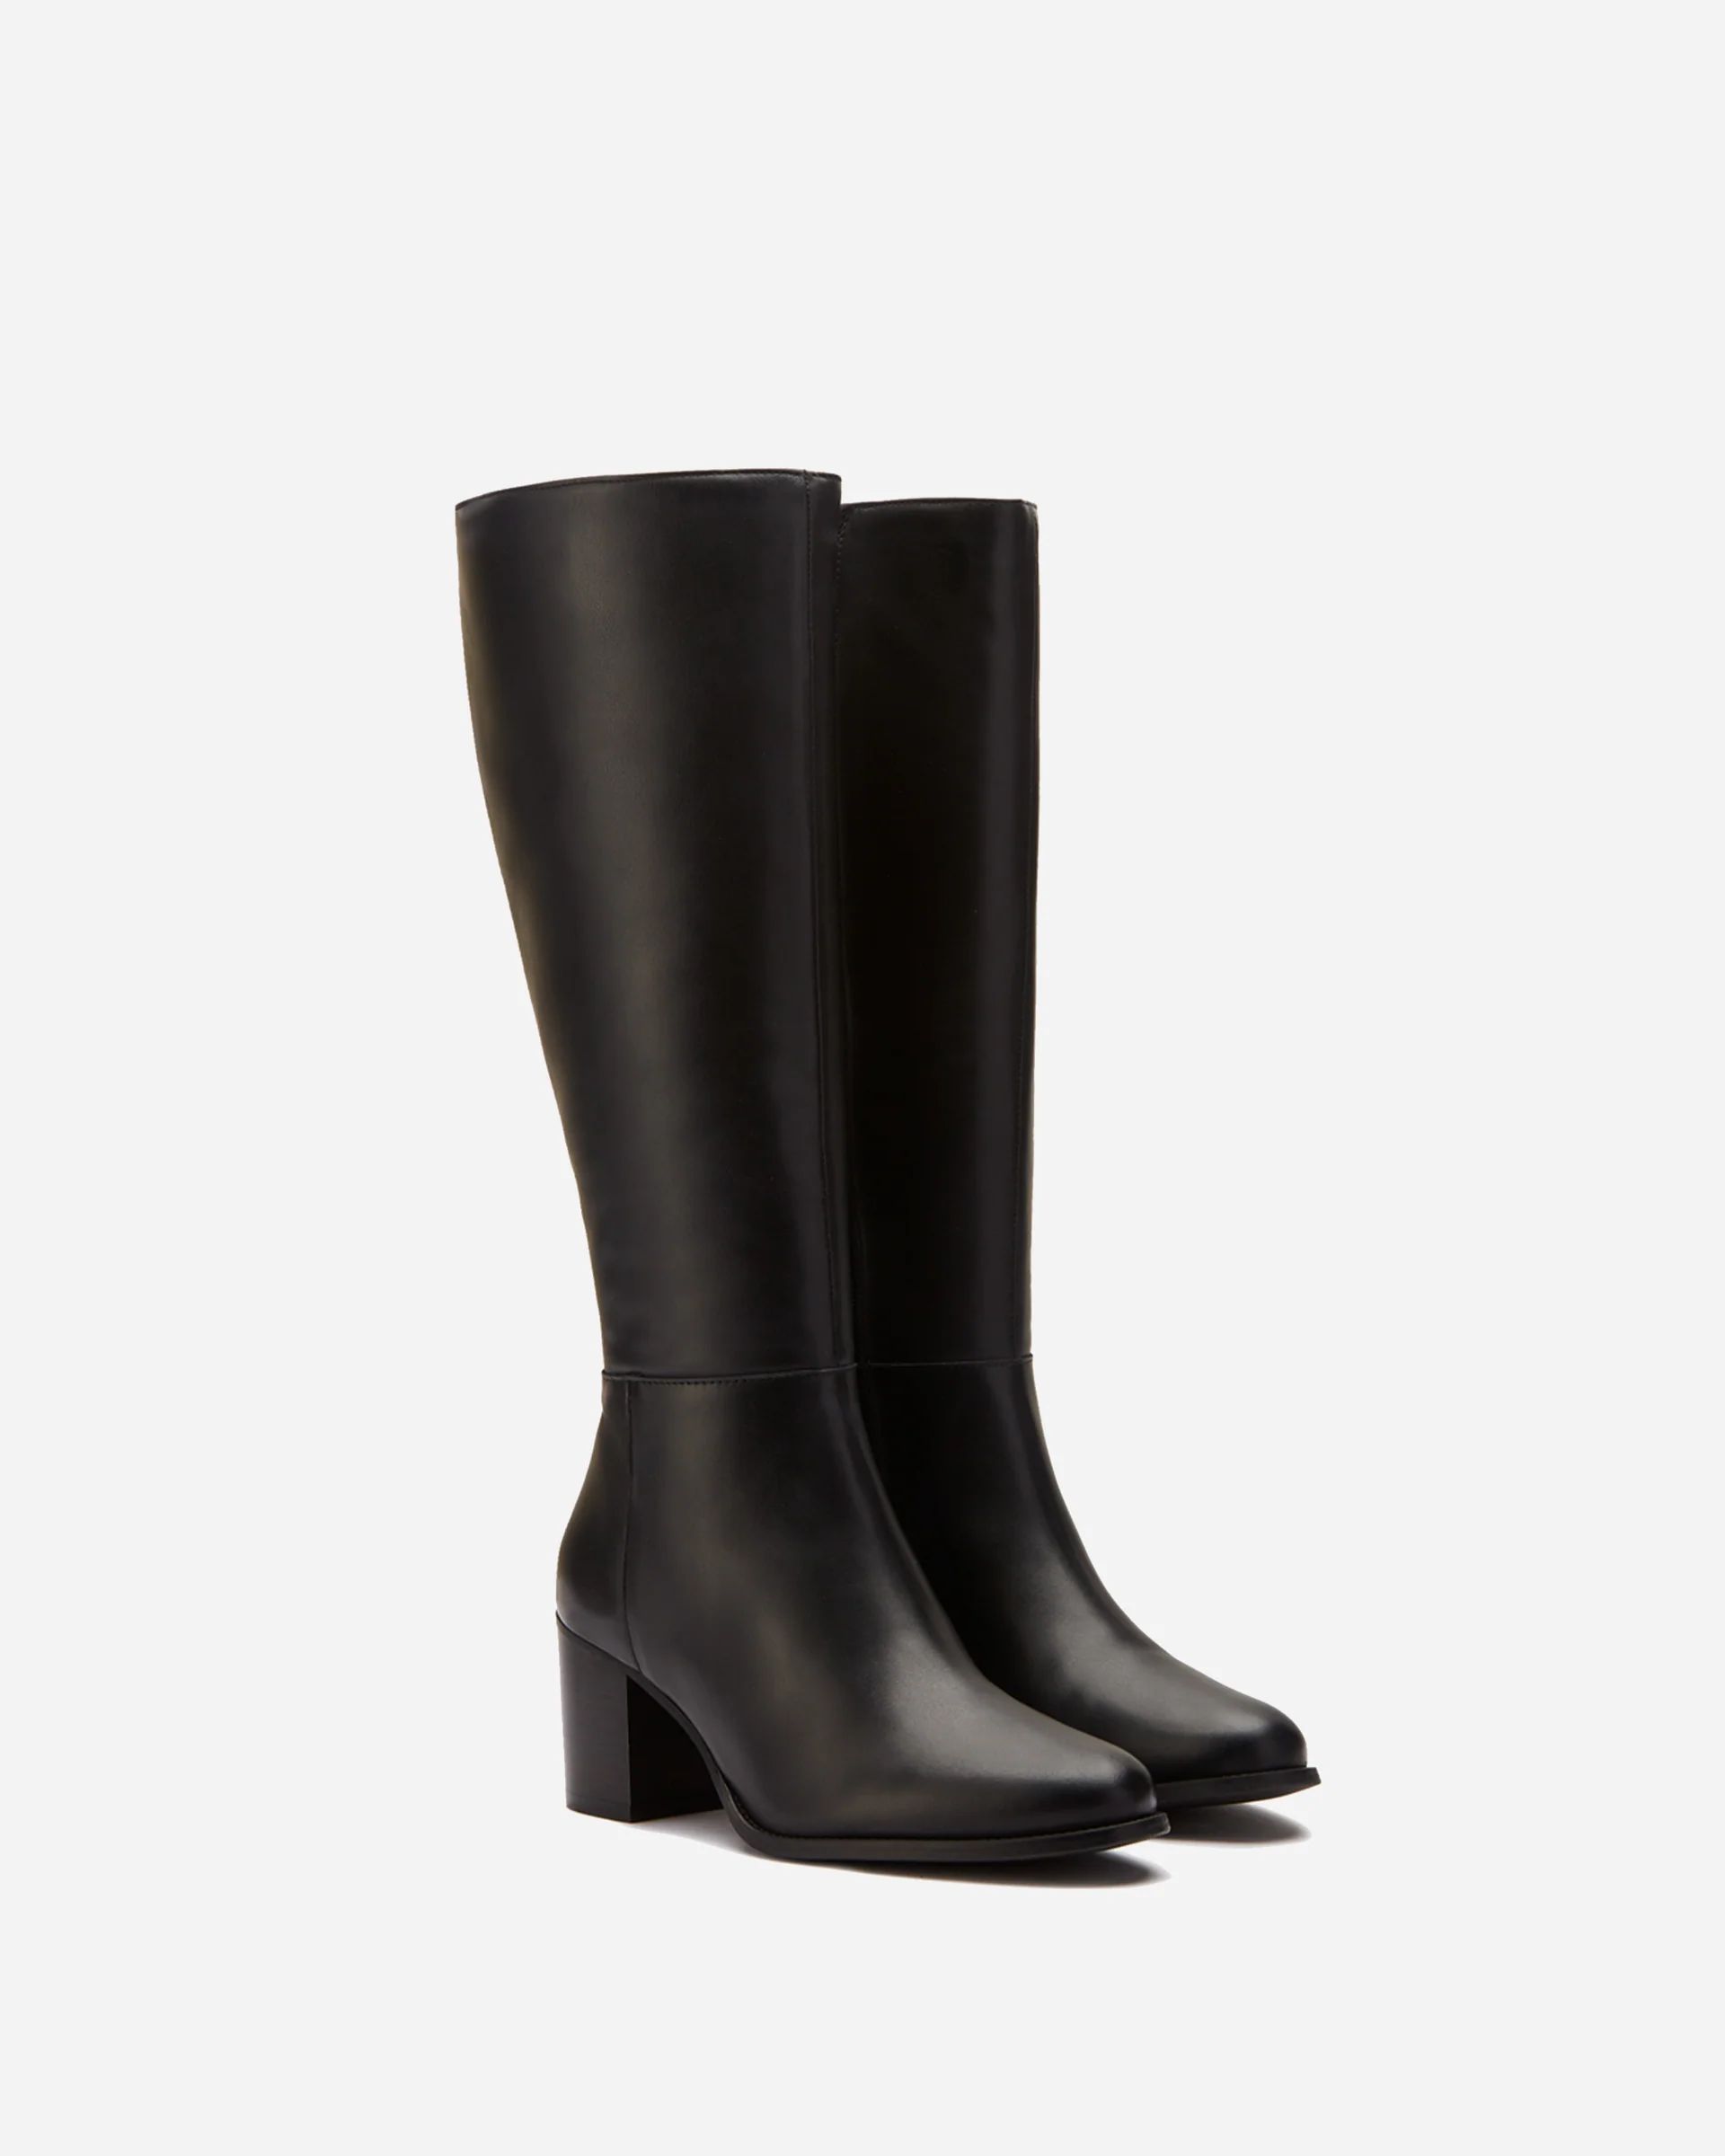 Dalia Standard Knee High Boots in Black Leather | DuoBoots